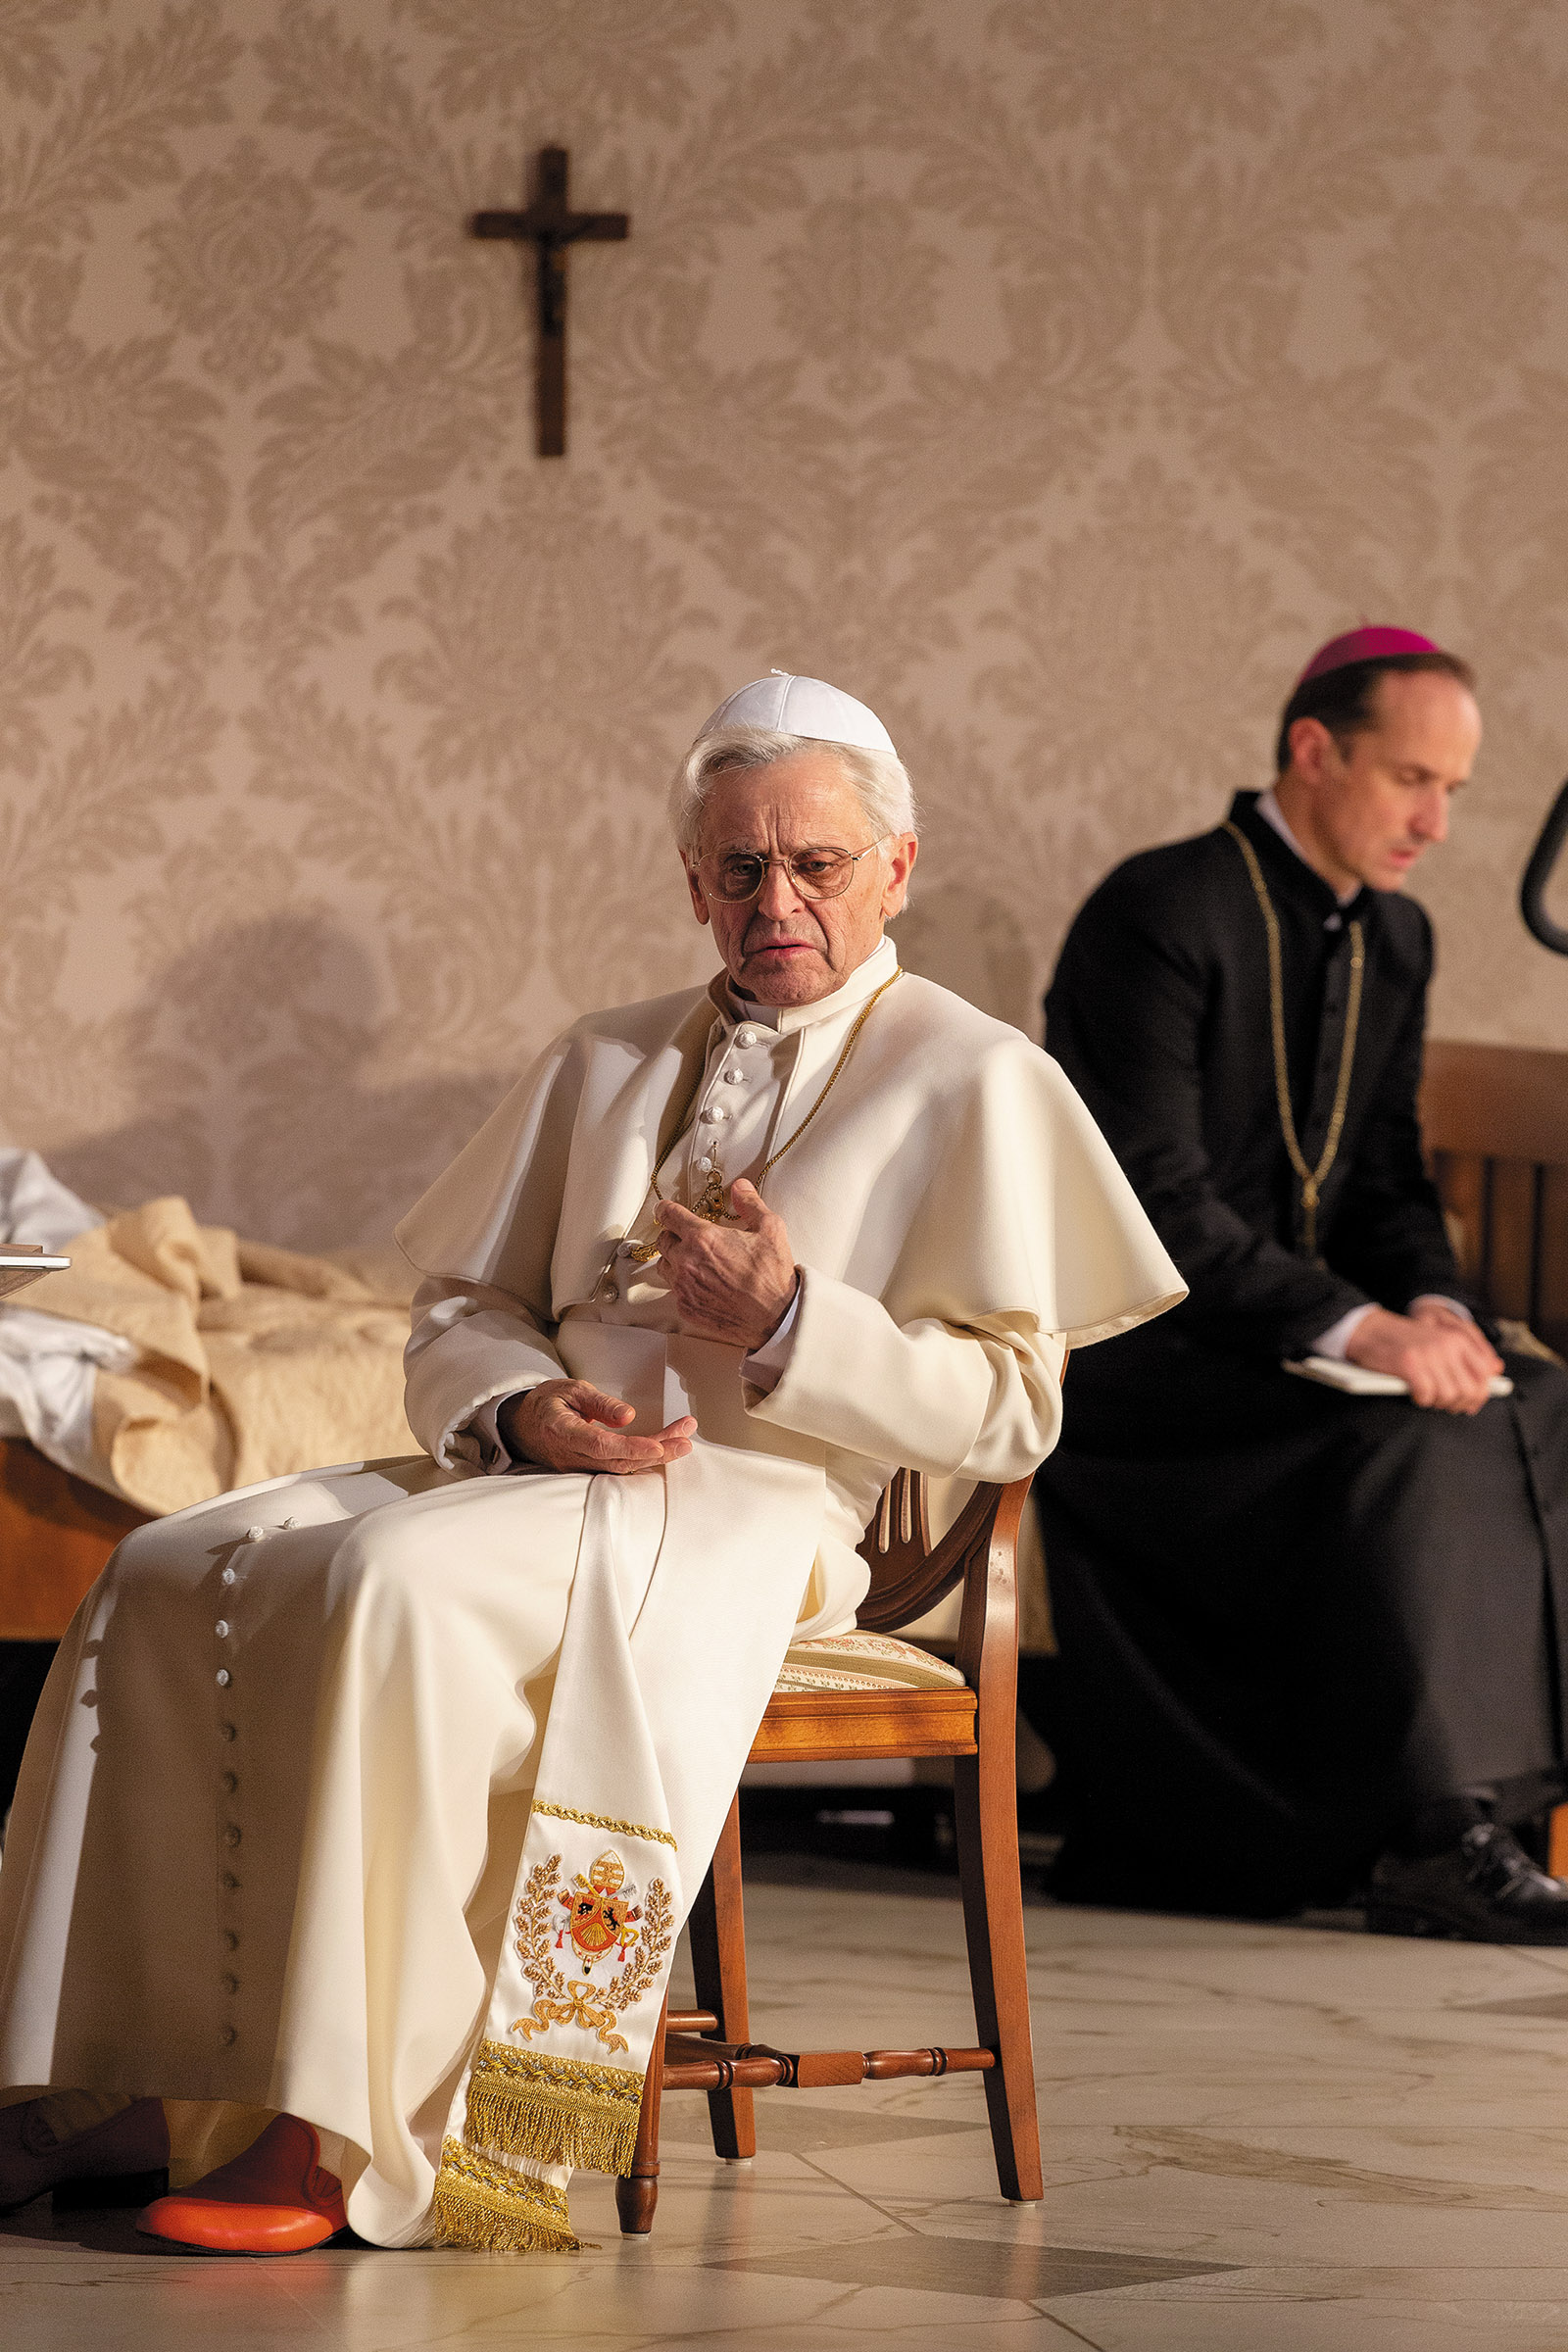 Mikhail Baryshnikov as Benedict XVI and Kaspars Znotiņš as Georg Gänswein in The White Helicopter at the New Riga Theater